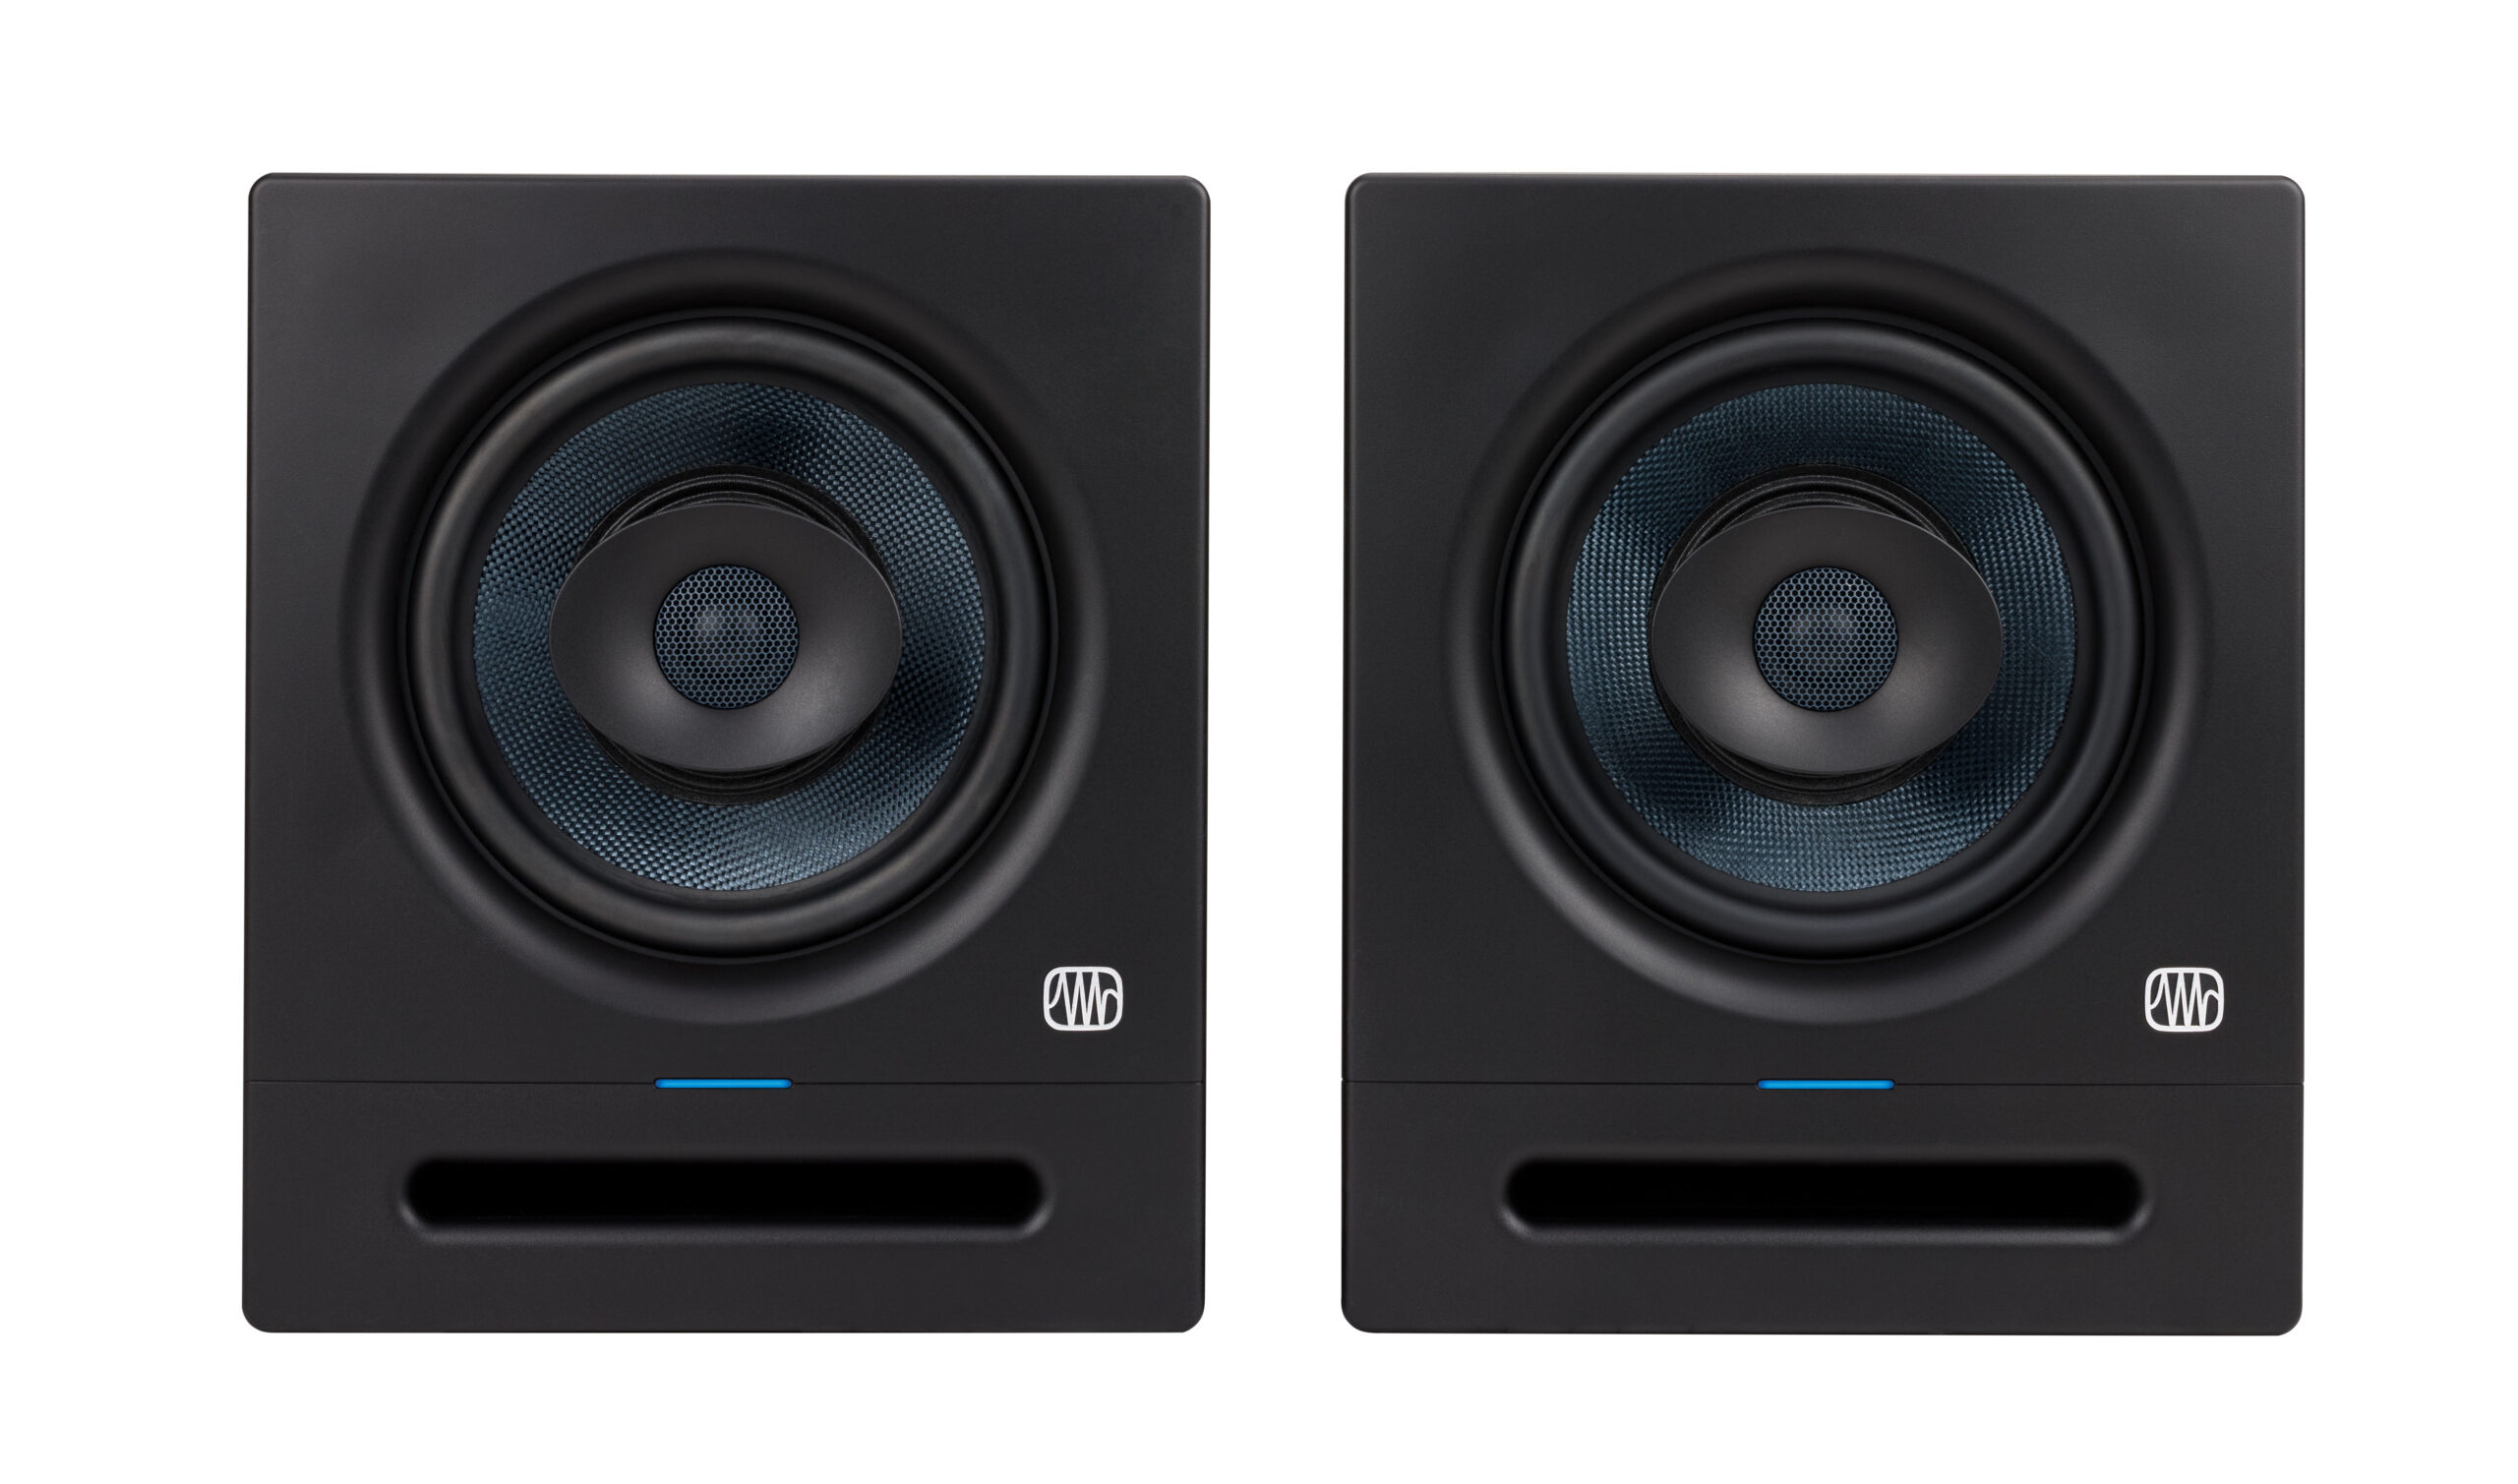 A pair of PreSonus subwoofers on a plain background